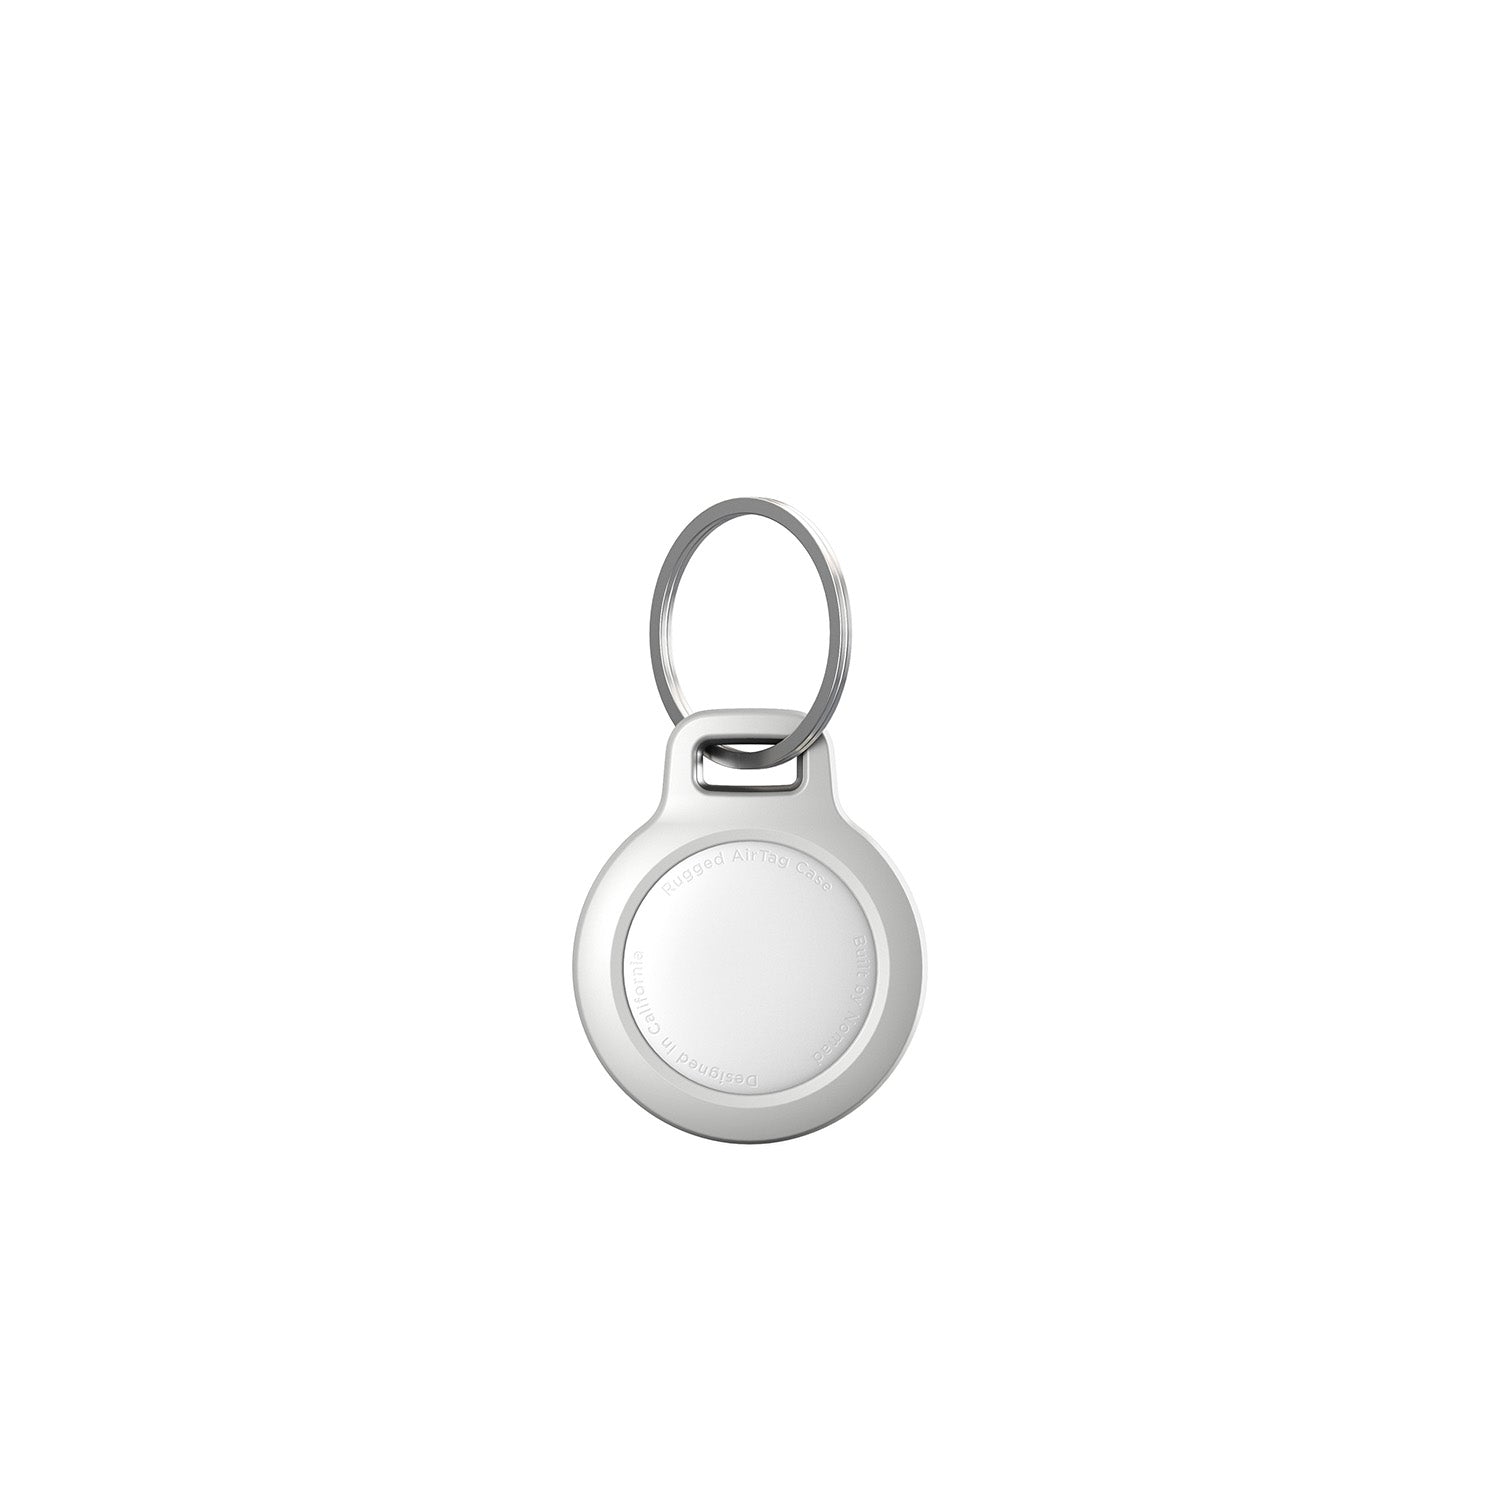 NOMAD Rugged Keychain for AirTag Default NOMAD White 